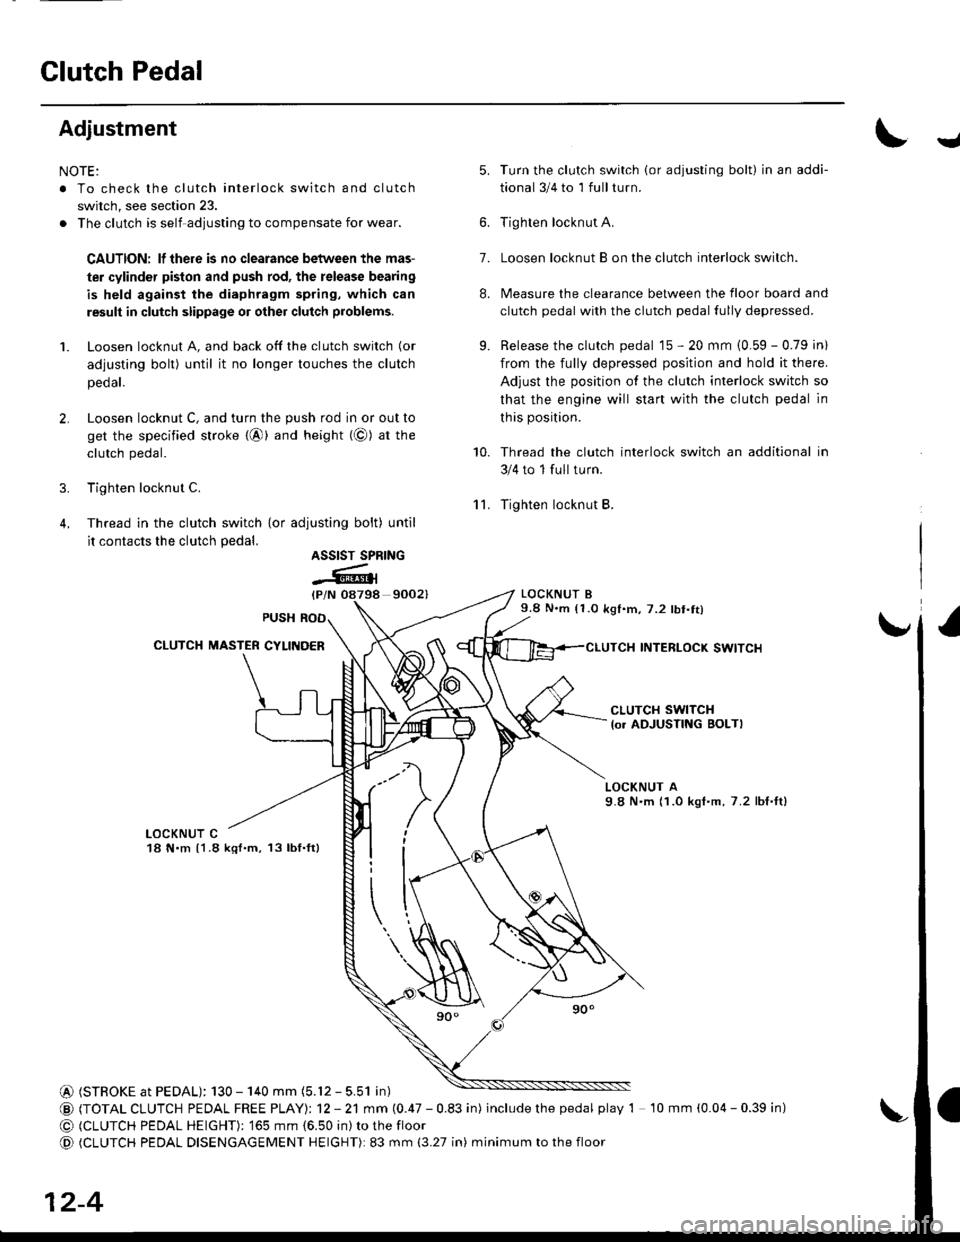 HONDA CIVIC 1996 6.G Owners Guide Glutch Pedal
Adjustment
NOTE:
. To check the clutch interlock switch and clutch
switch, see section 23.
. The clutch is self-adjusting to compensate for wear.
CAUTION: lf there is no clearance between